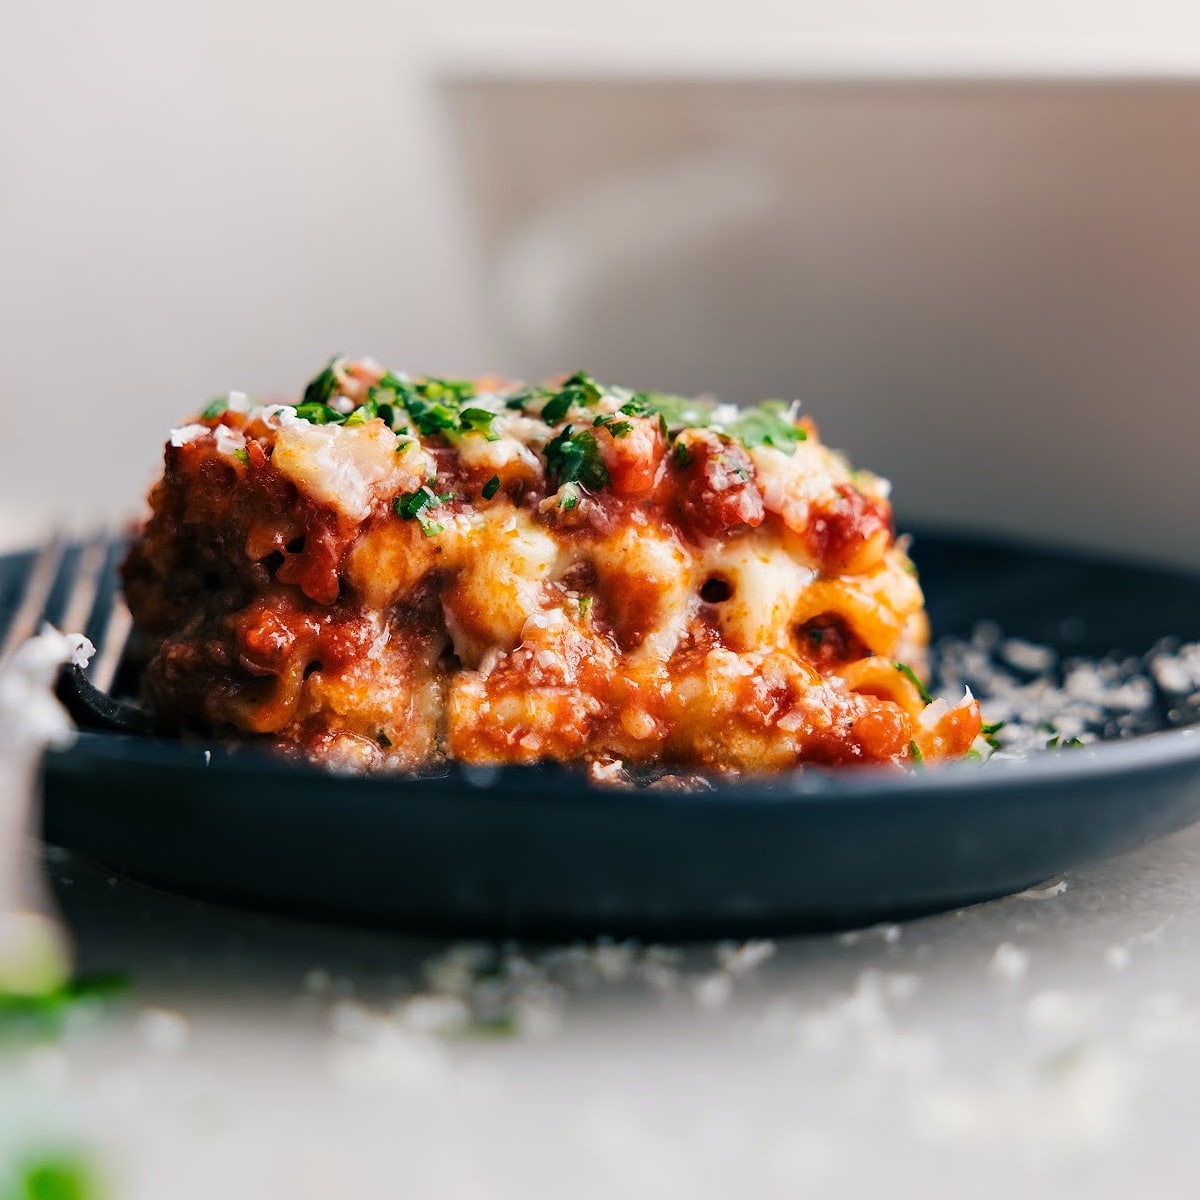 Shot of a piece of lasagna from Chelsea's Messy Apron's food website.